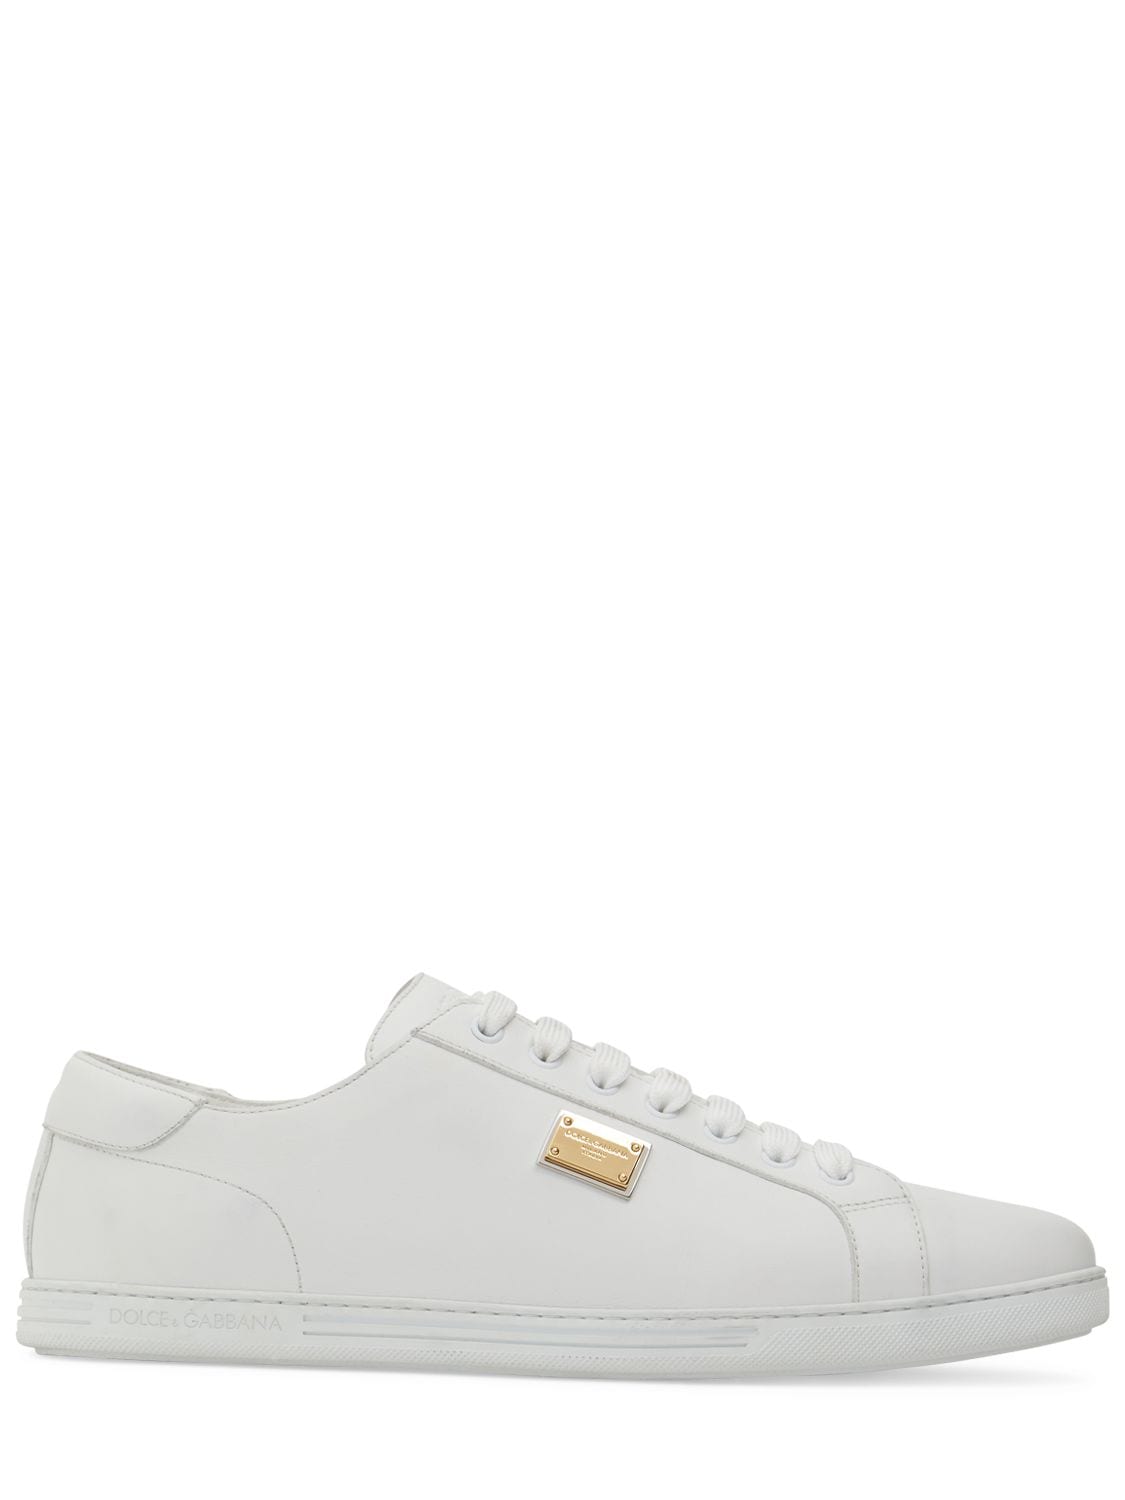 Dolce & Gabbana Saint Tropez Low Top Trainers In White